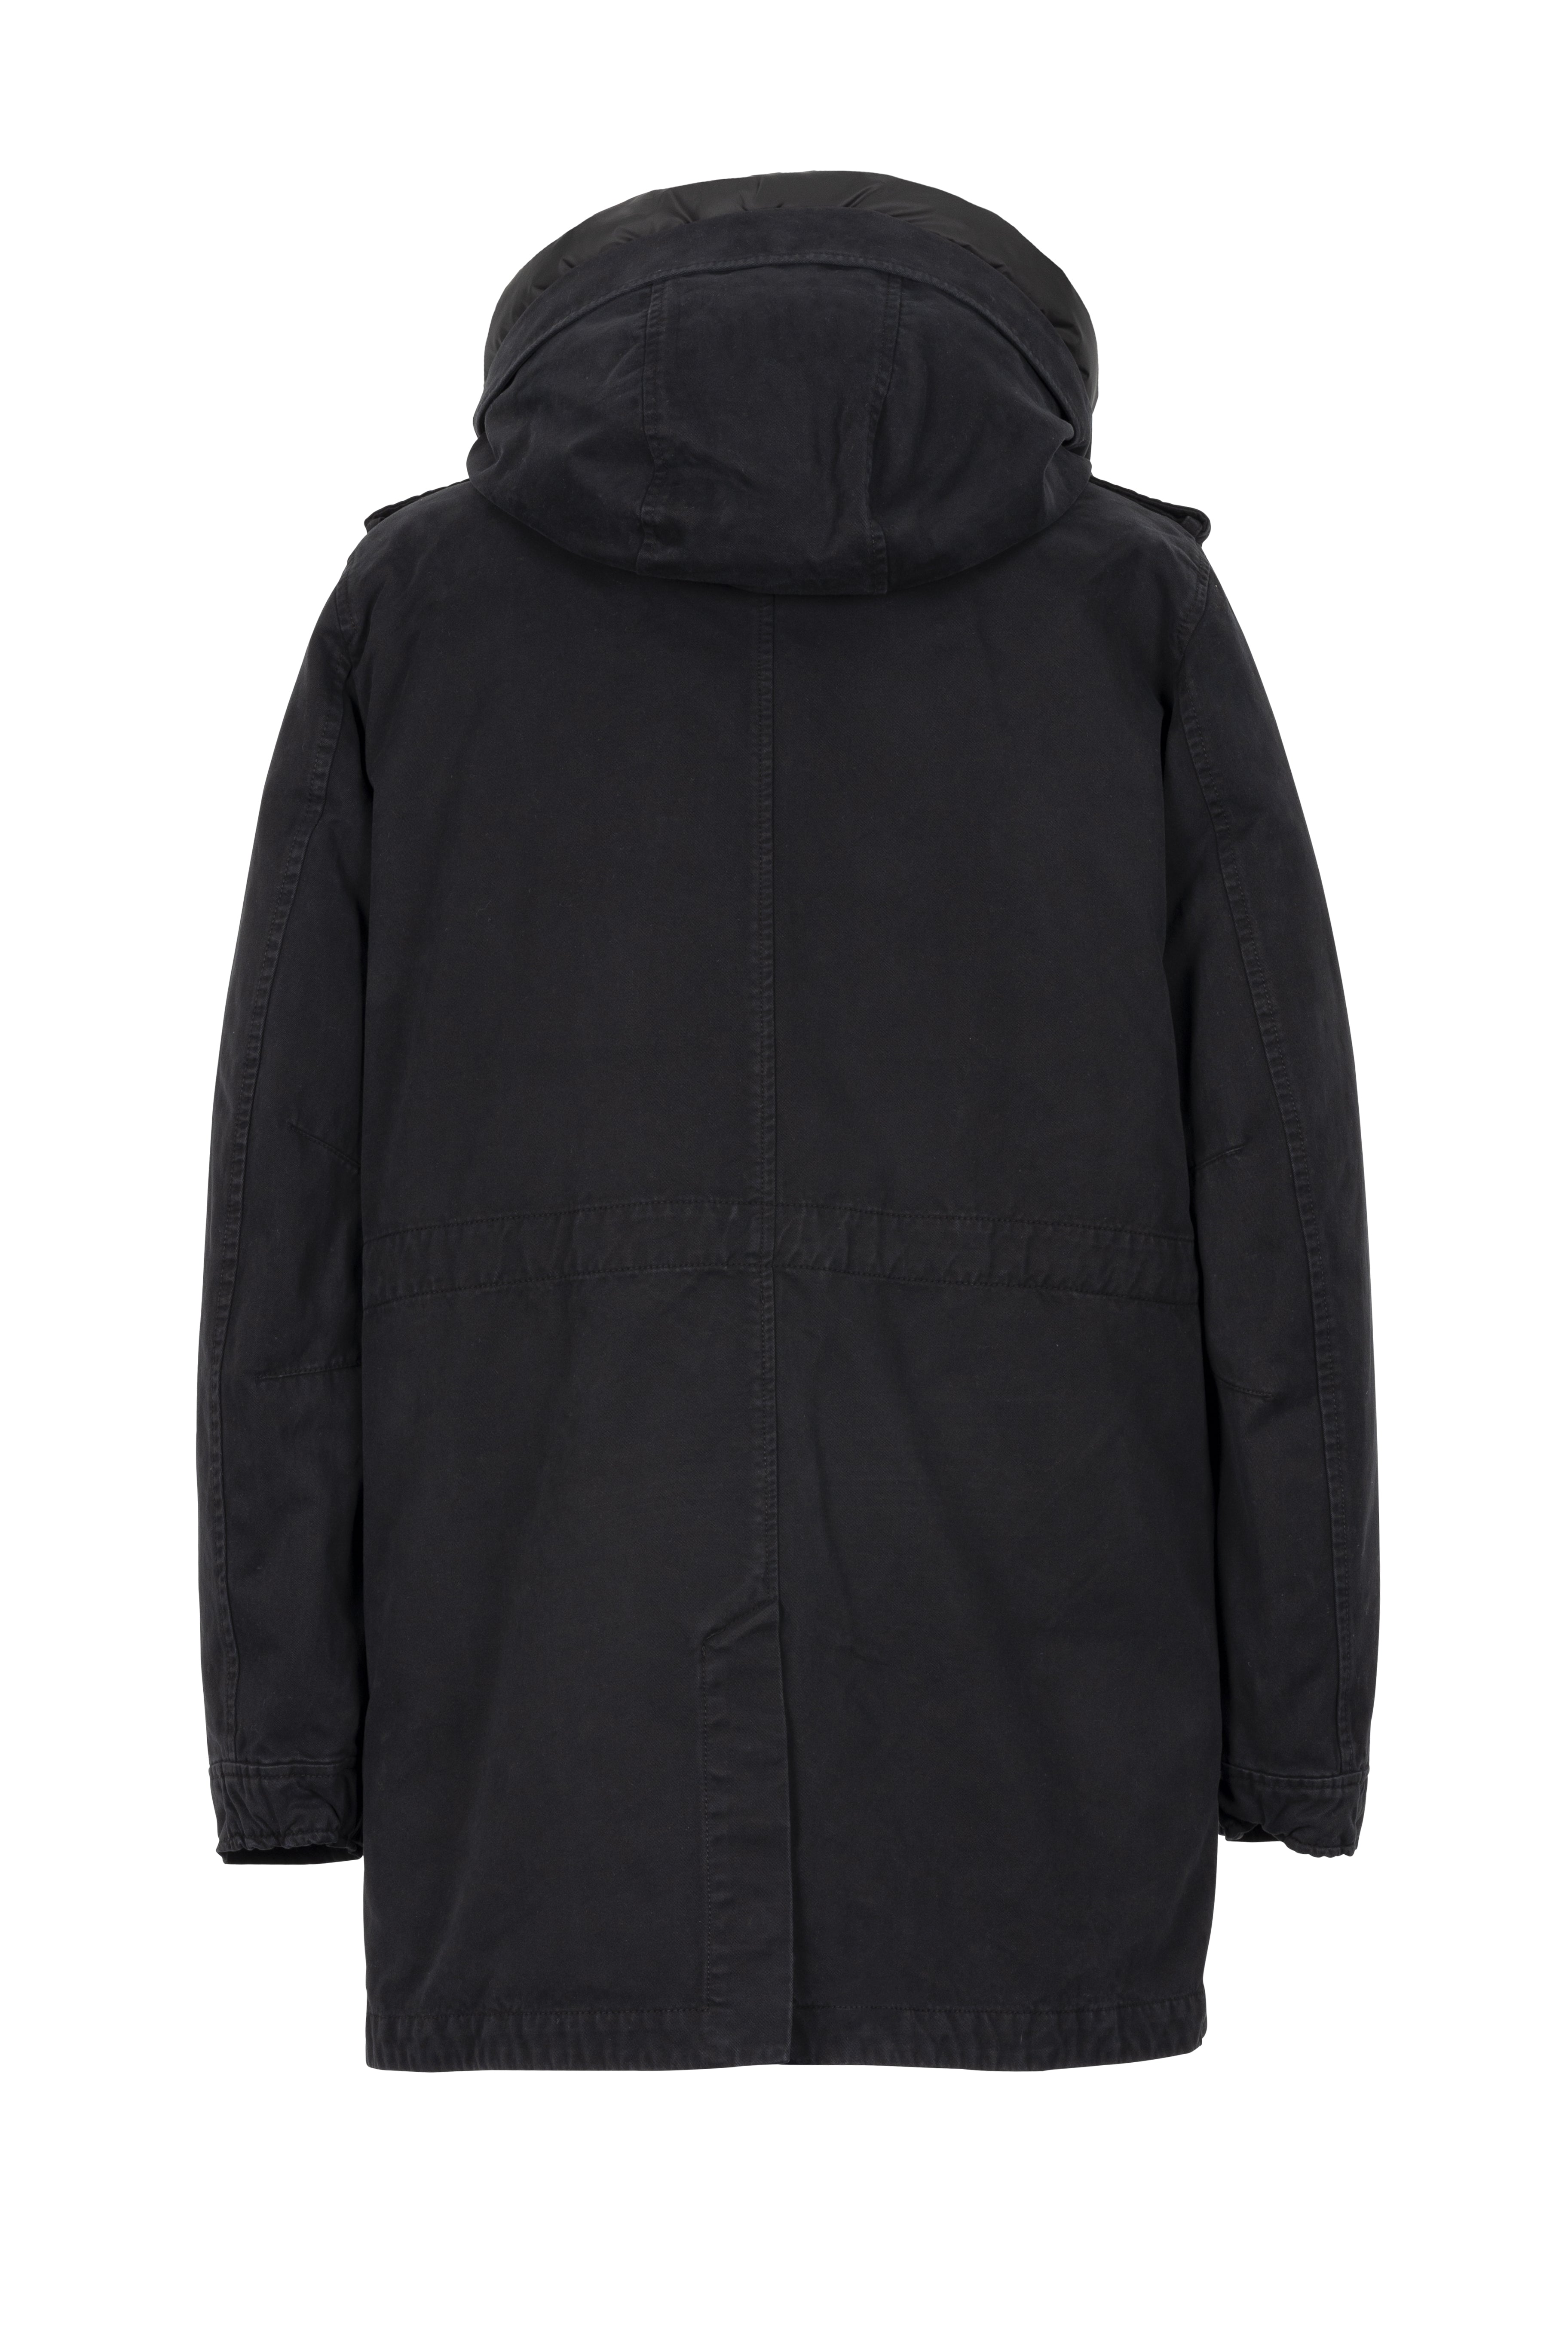 hooded Lempelius cotton parka with a straight fit 